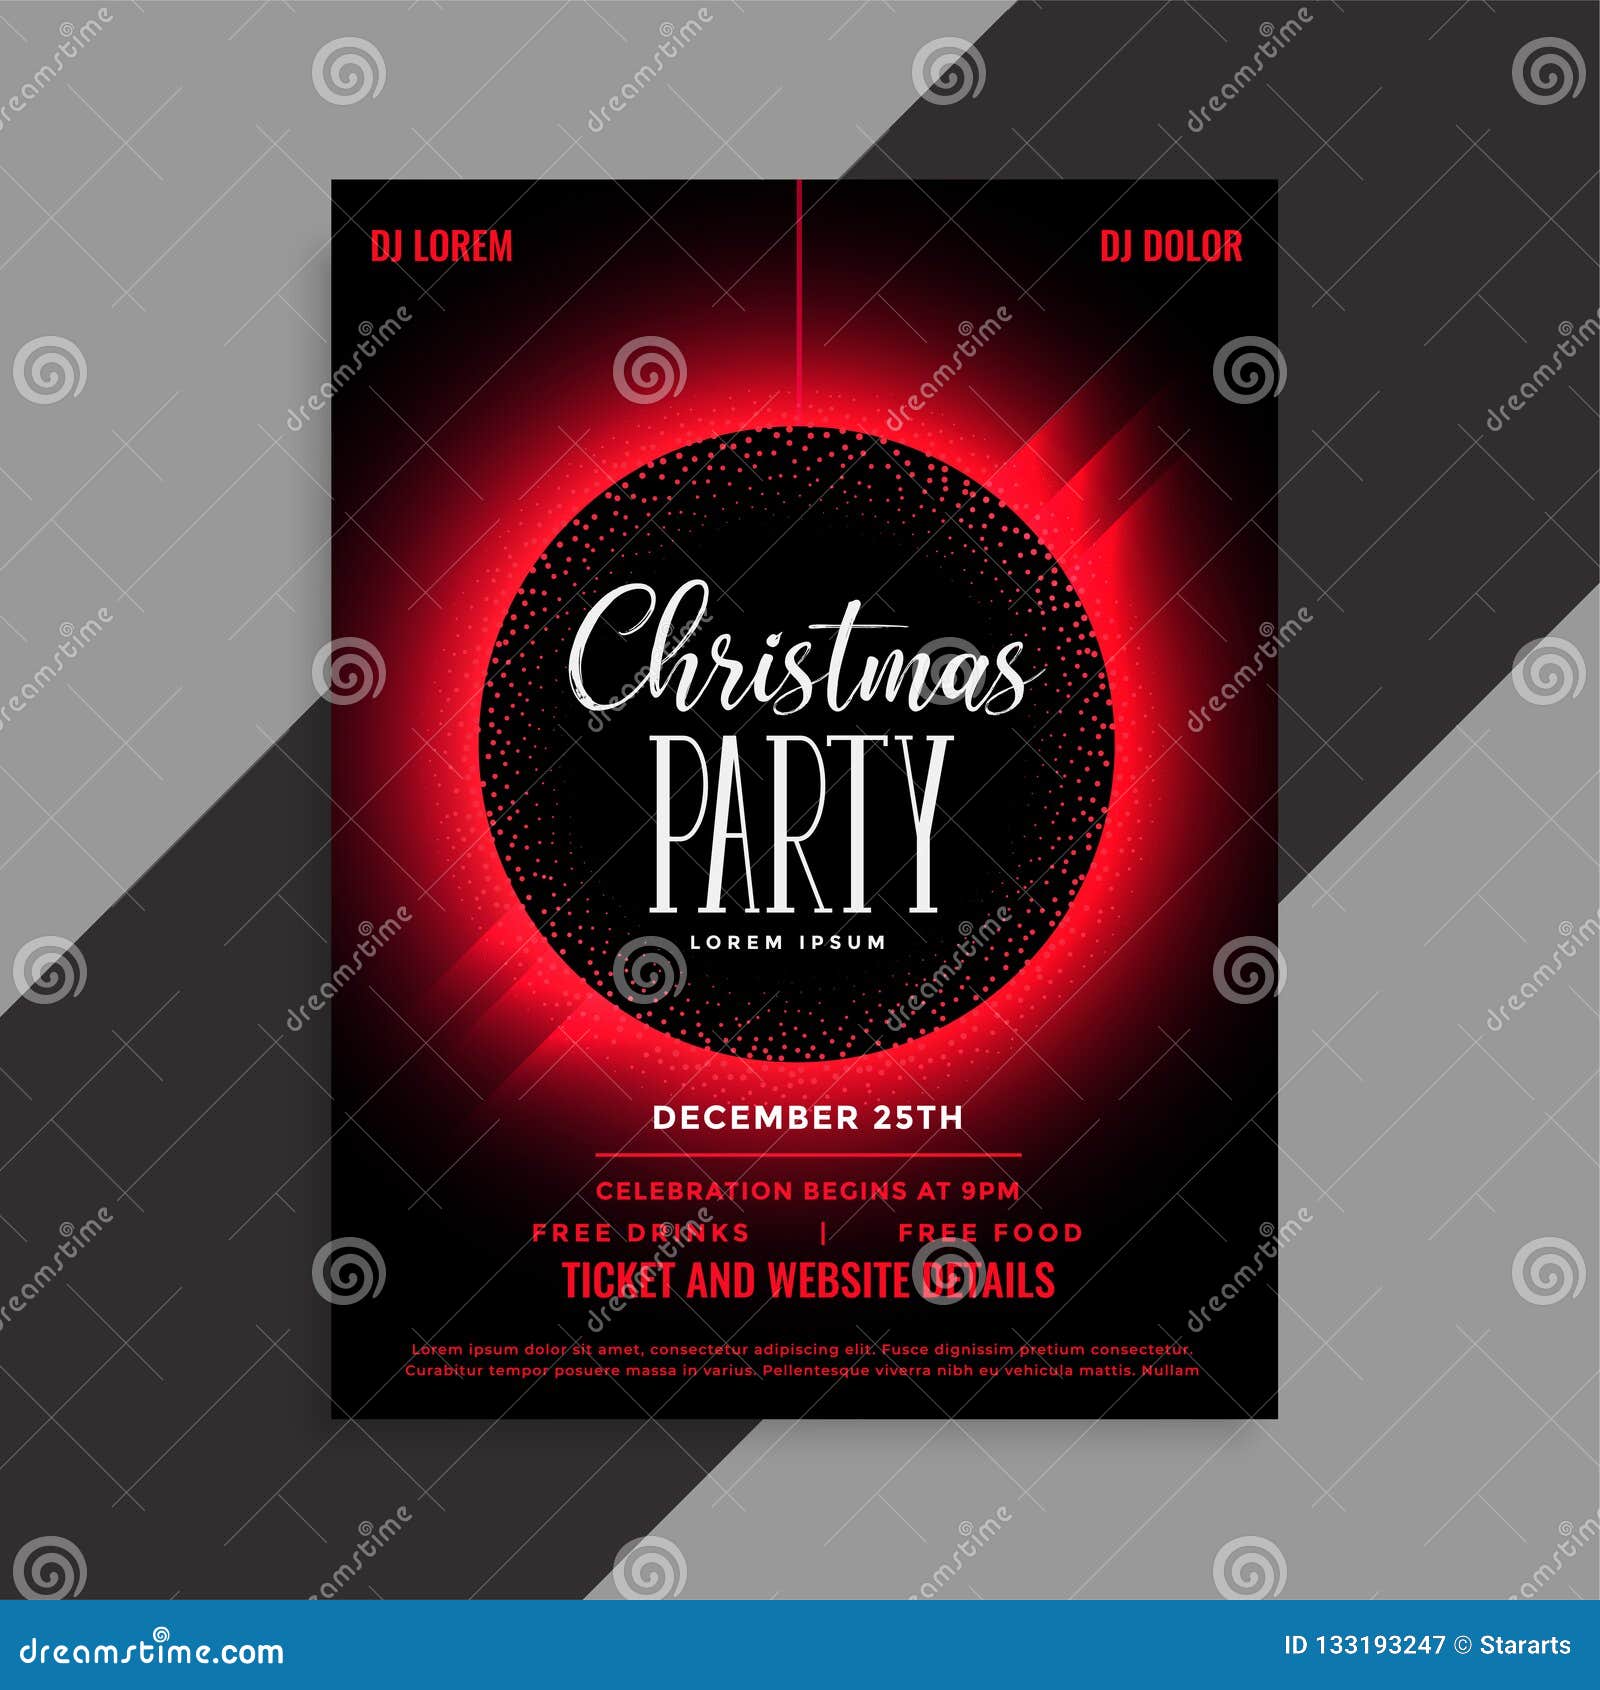 Christmas Party Event Invitation Flyer Template Stock Vector Illustration Of Poster Dance 133193247